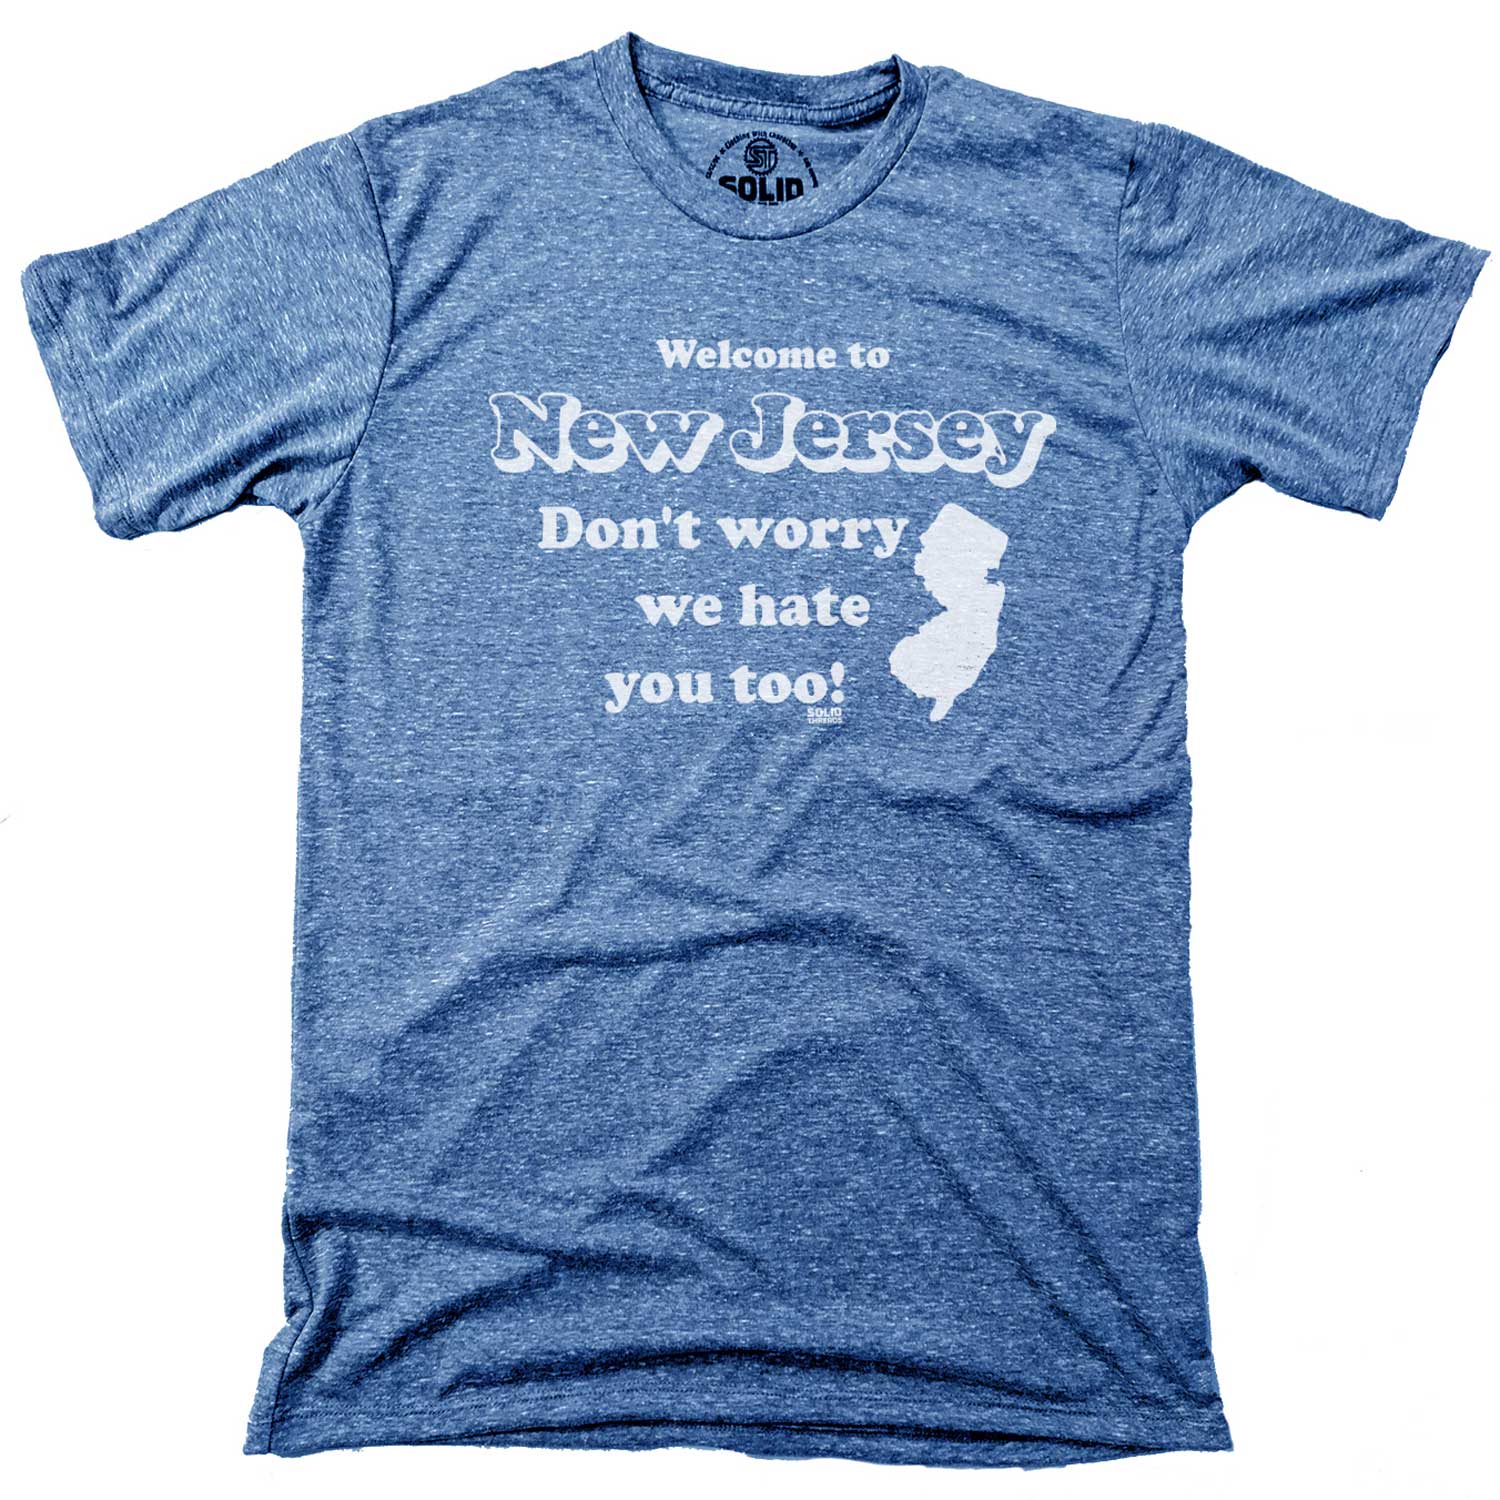 Welcome To New Jersey Don't Worry We Hate You Too T-shirt